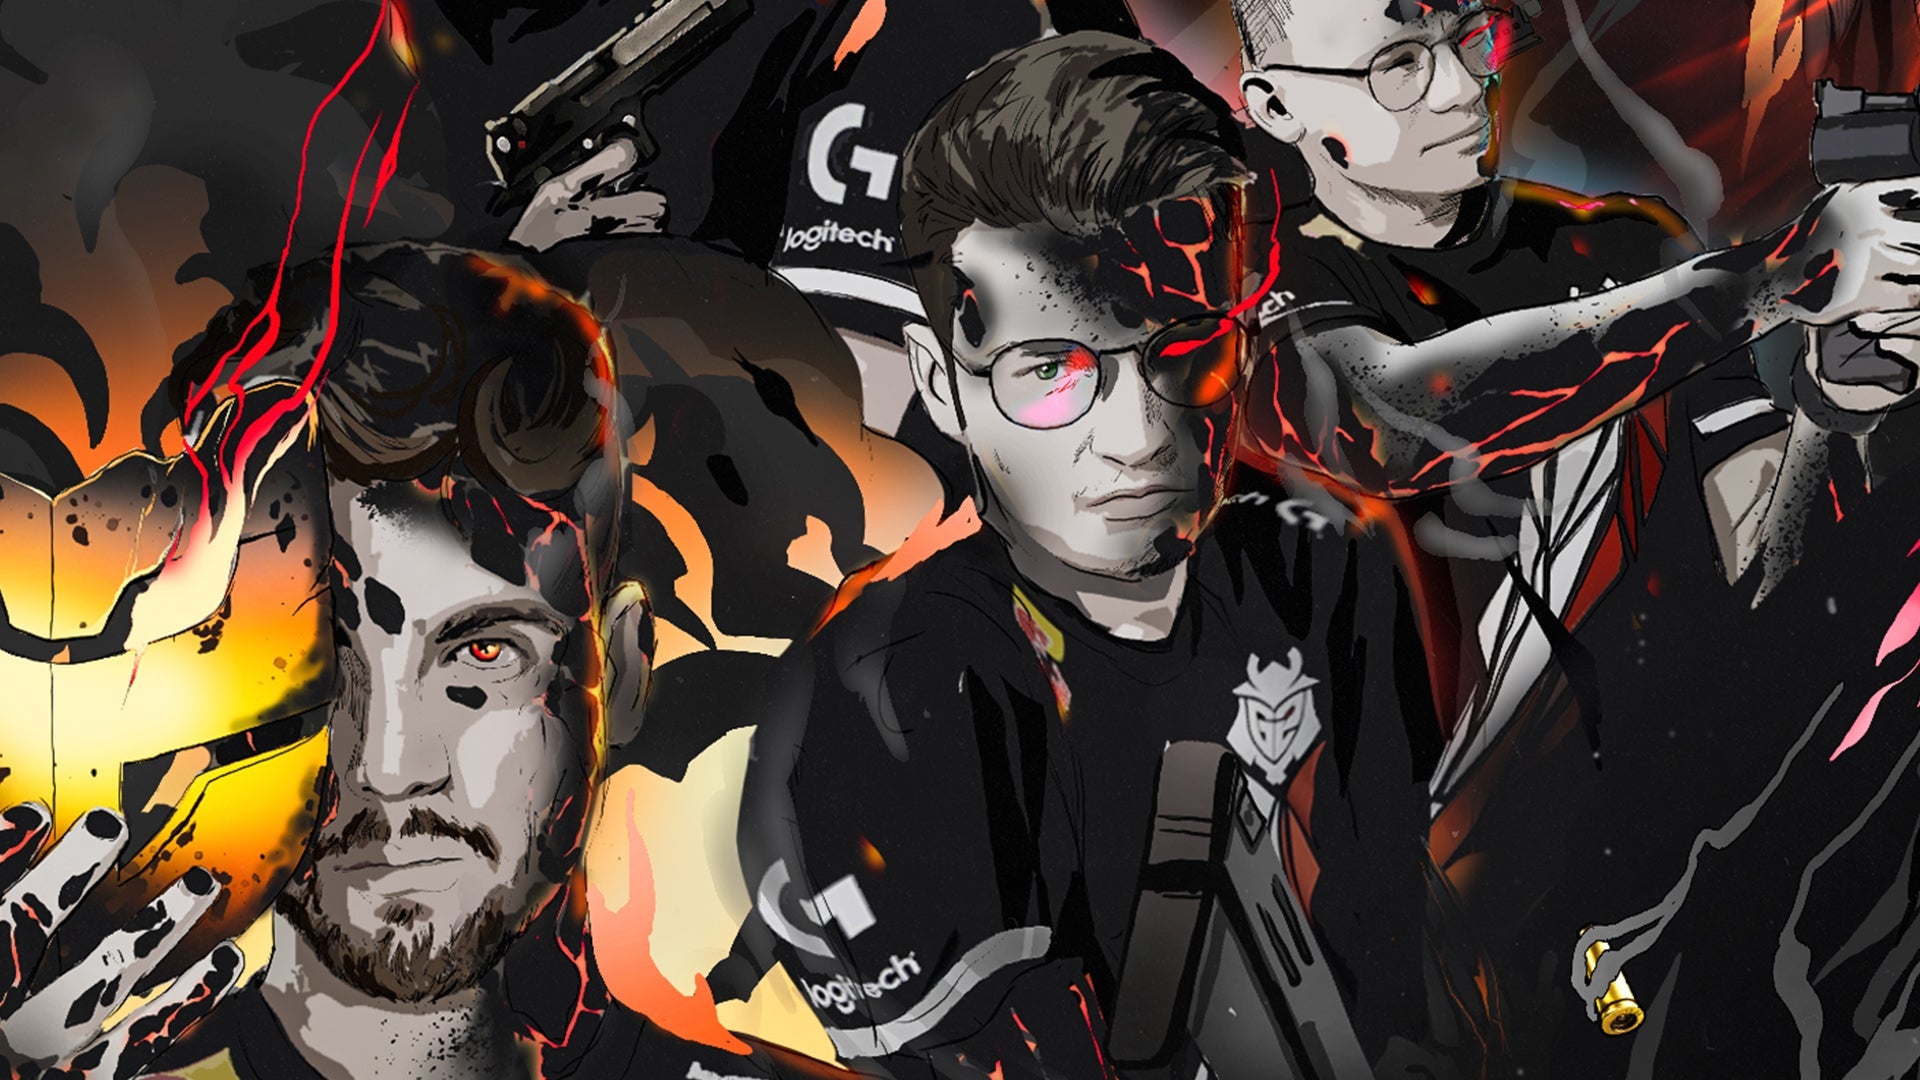 G2 Esports Wallpapers